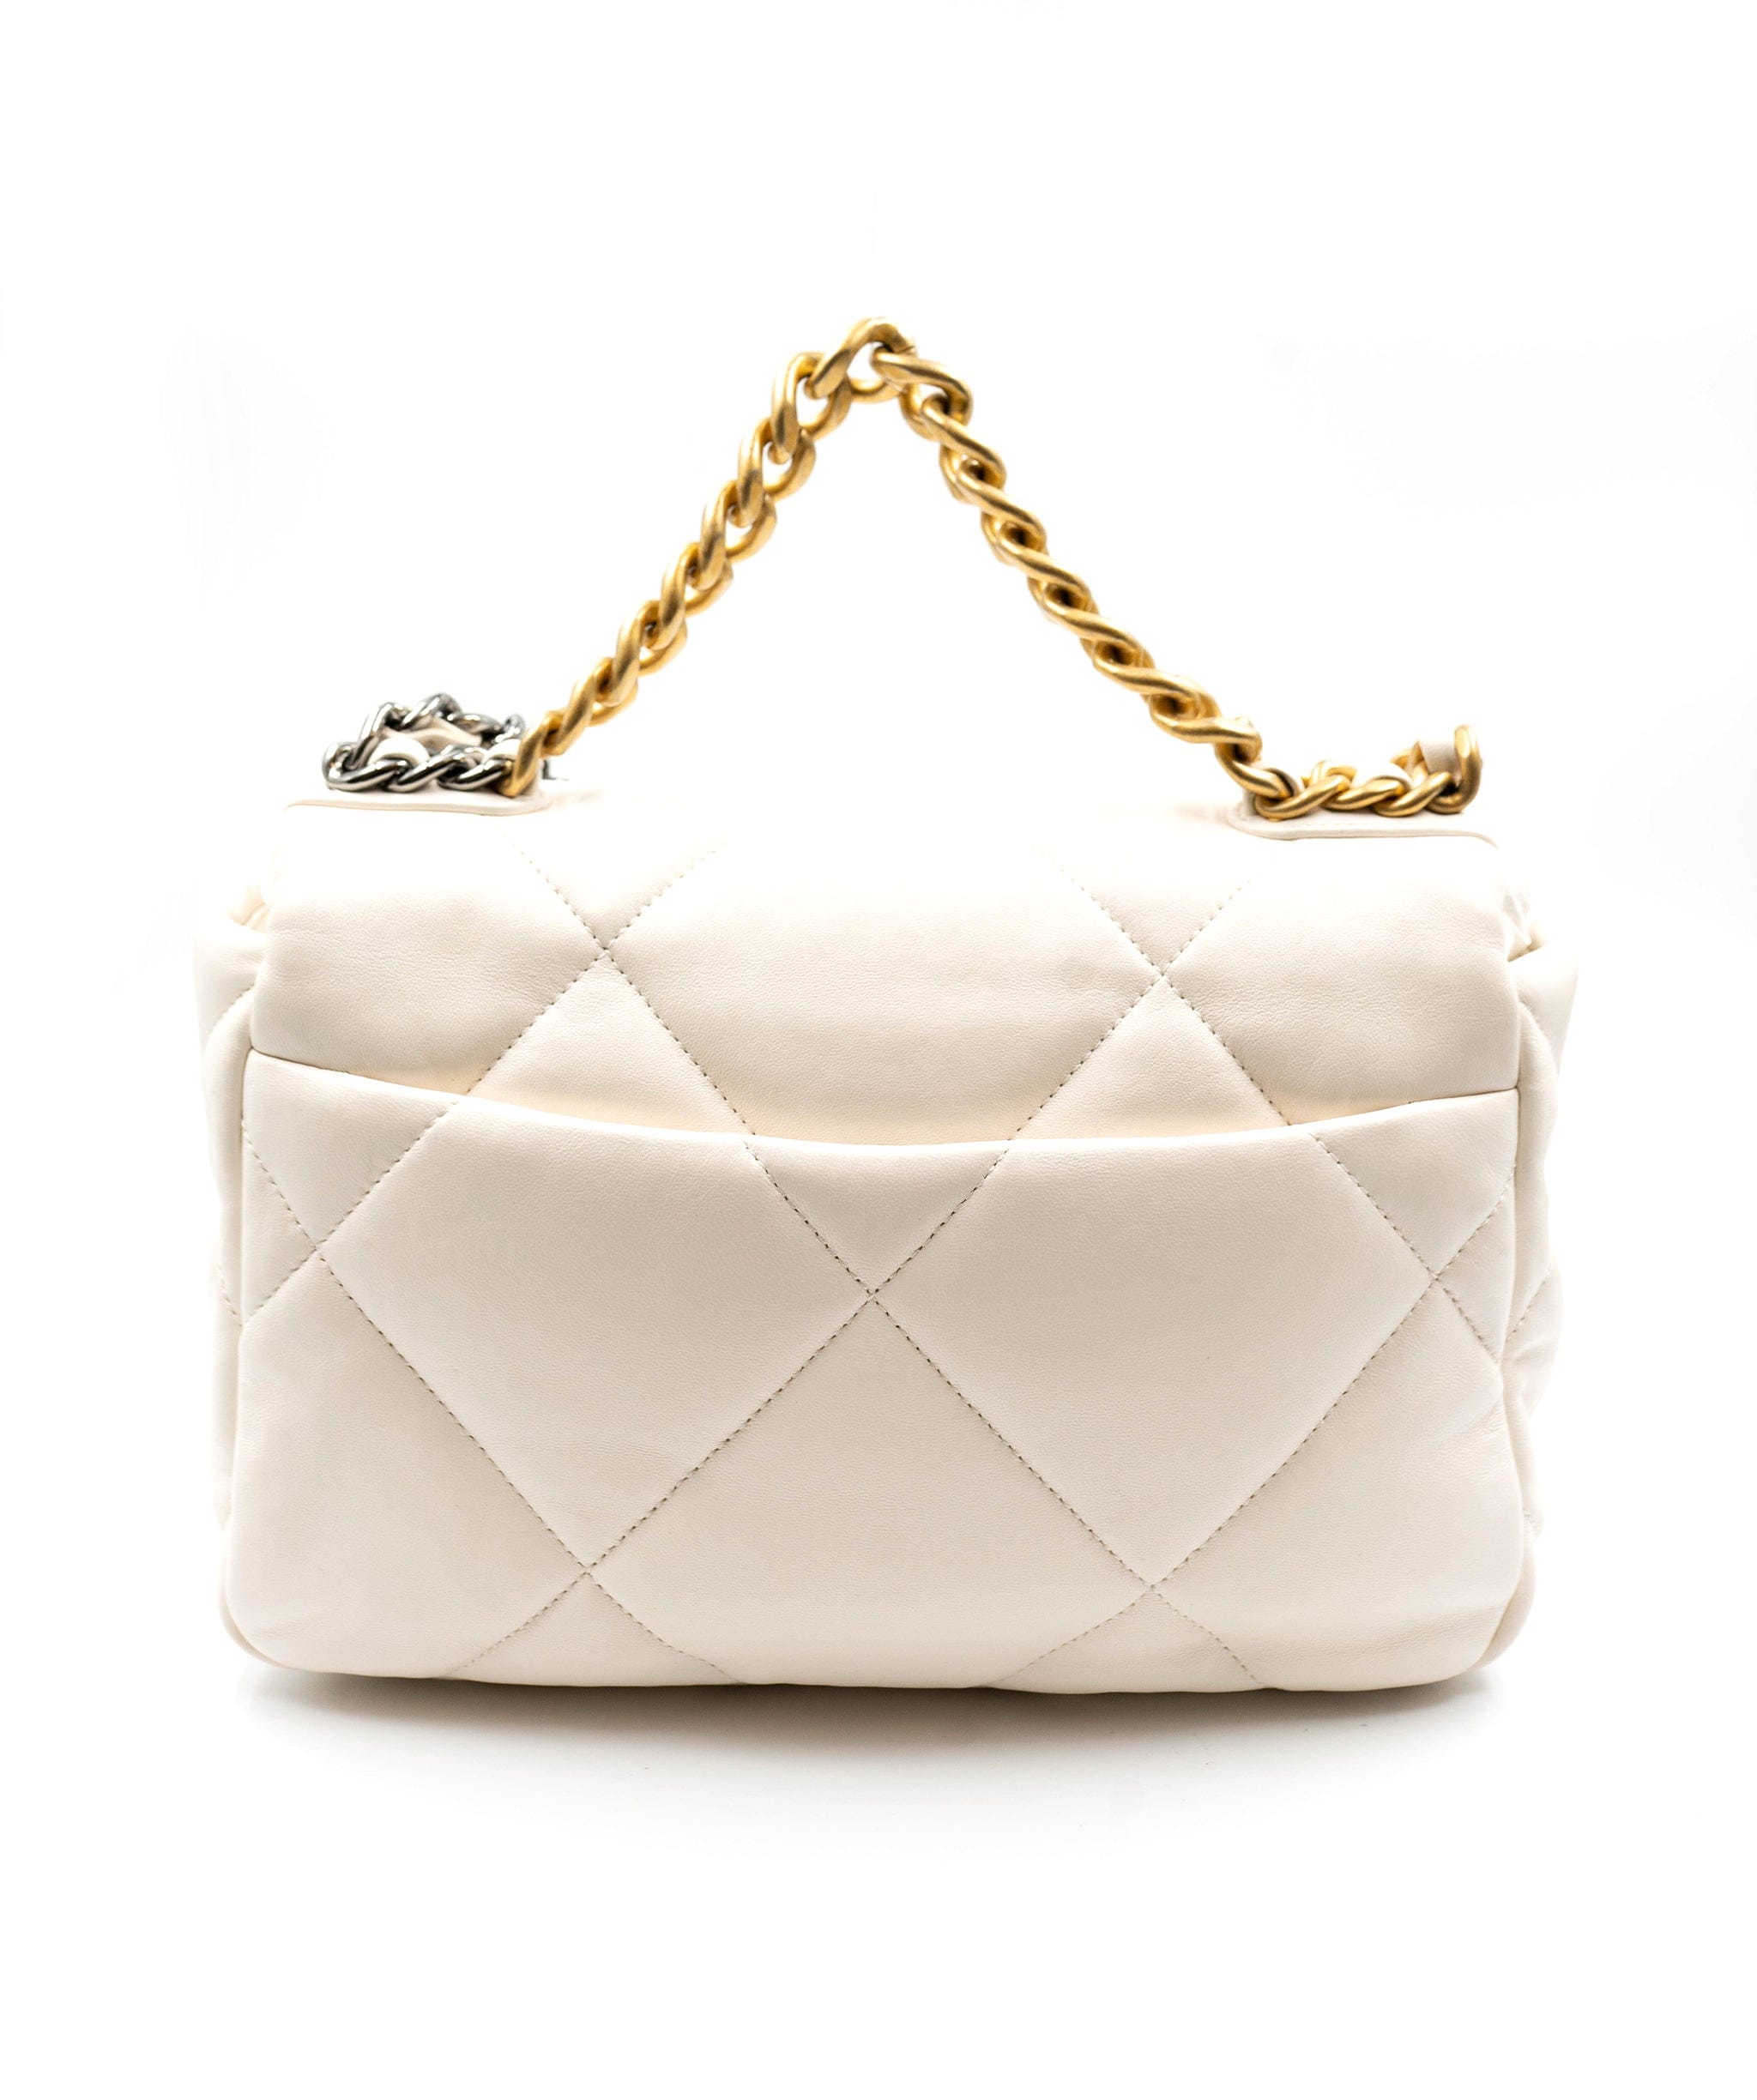 Chanel Chanel 19 Small white AGC1242